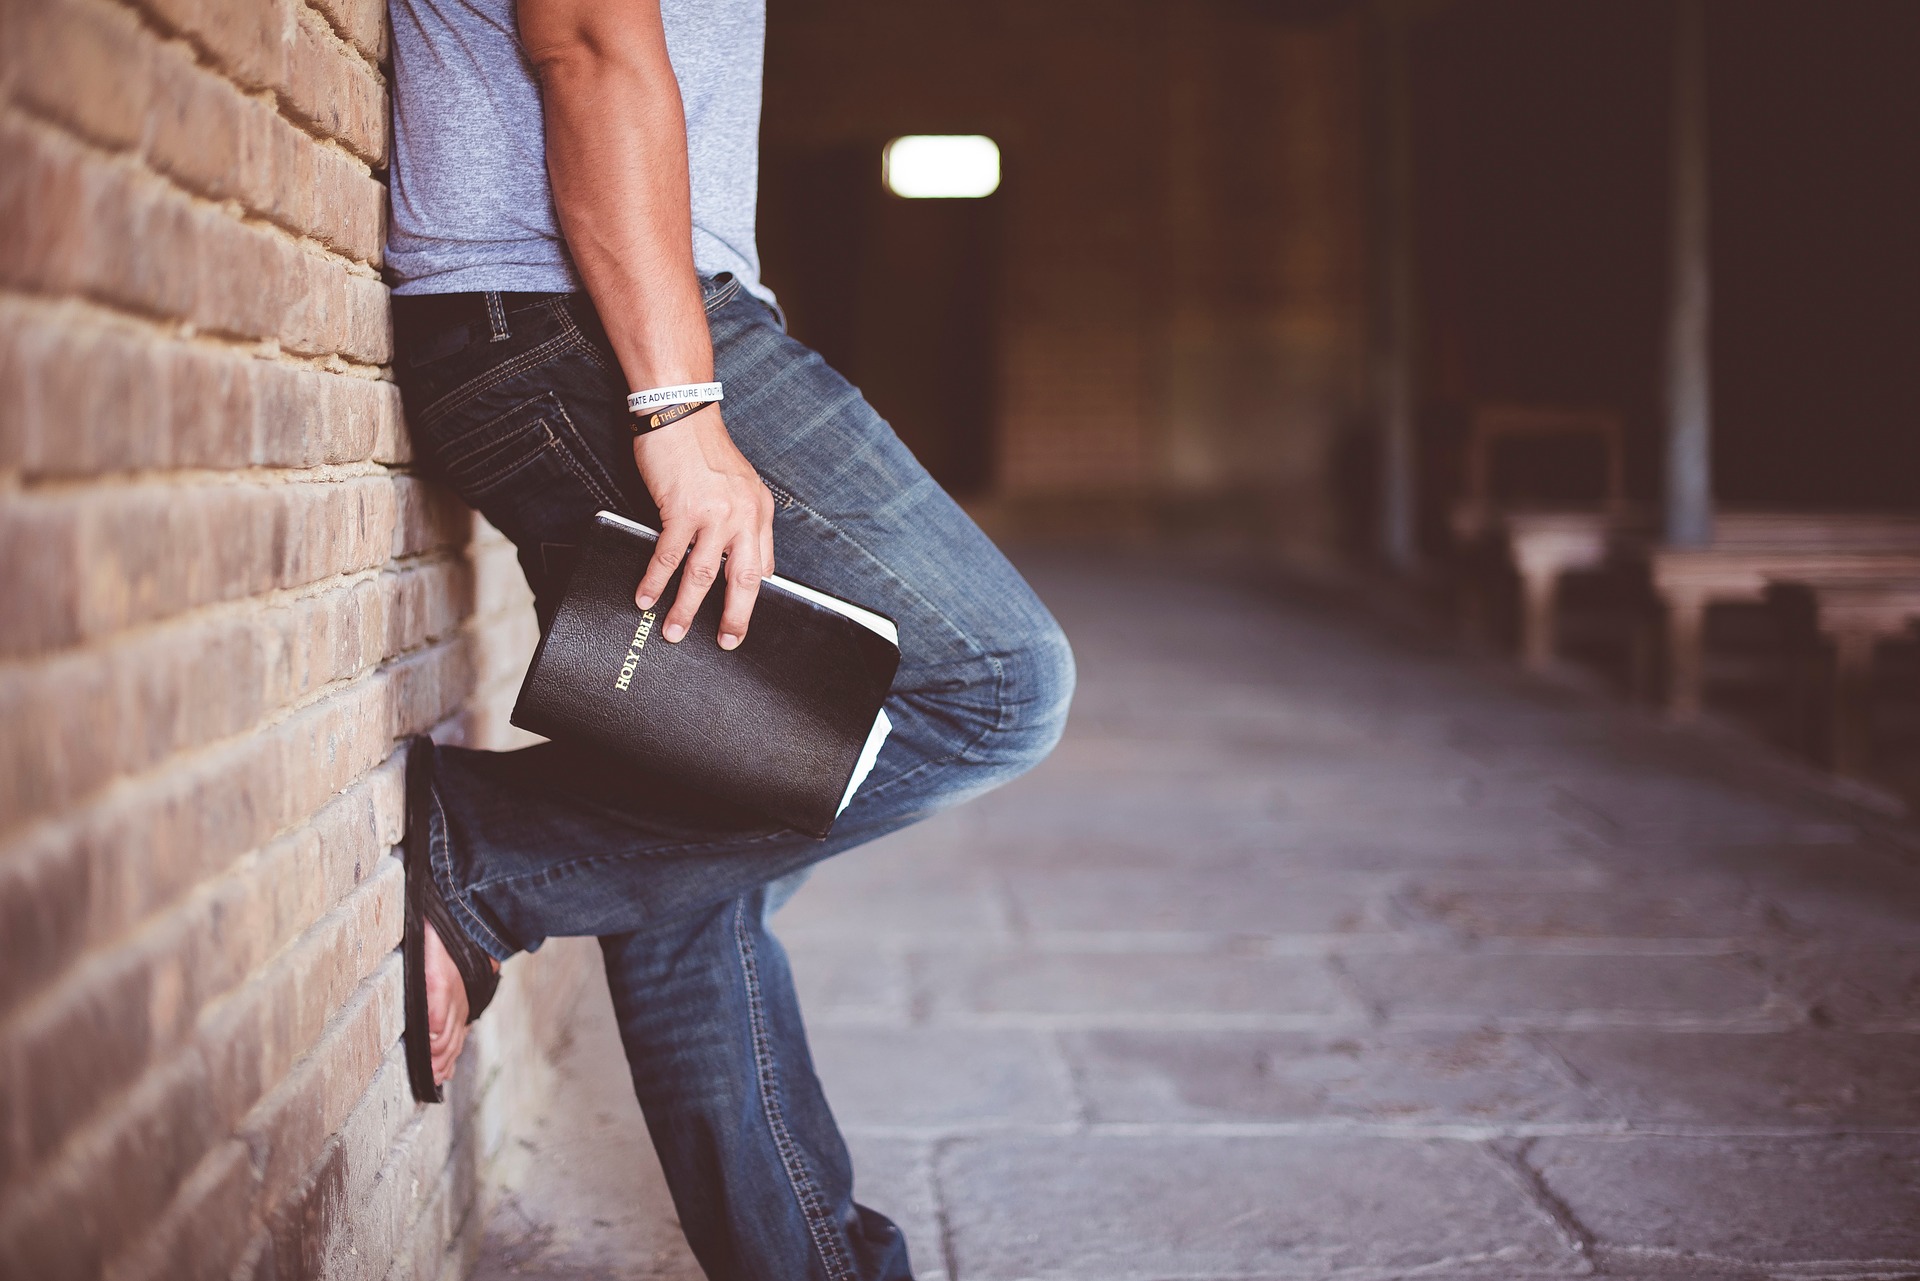 Leaning against wall with Bible